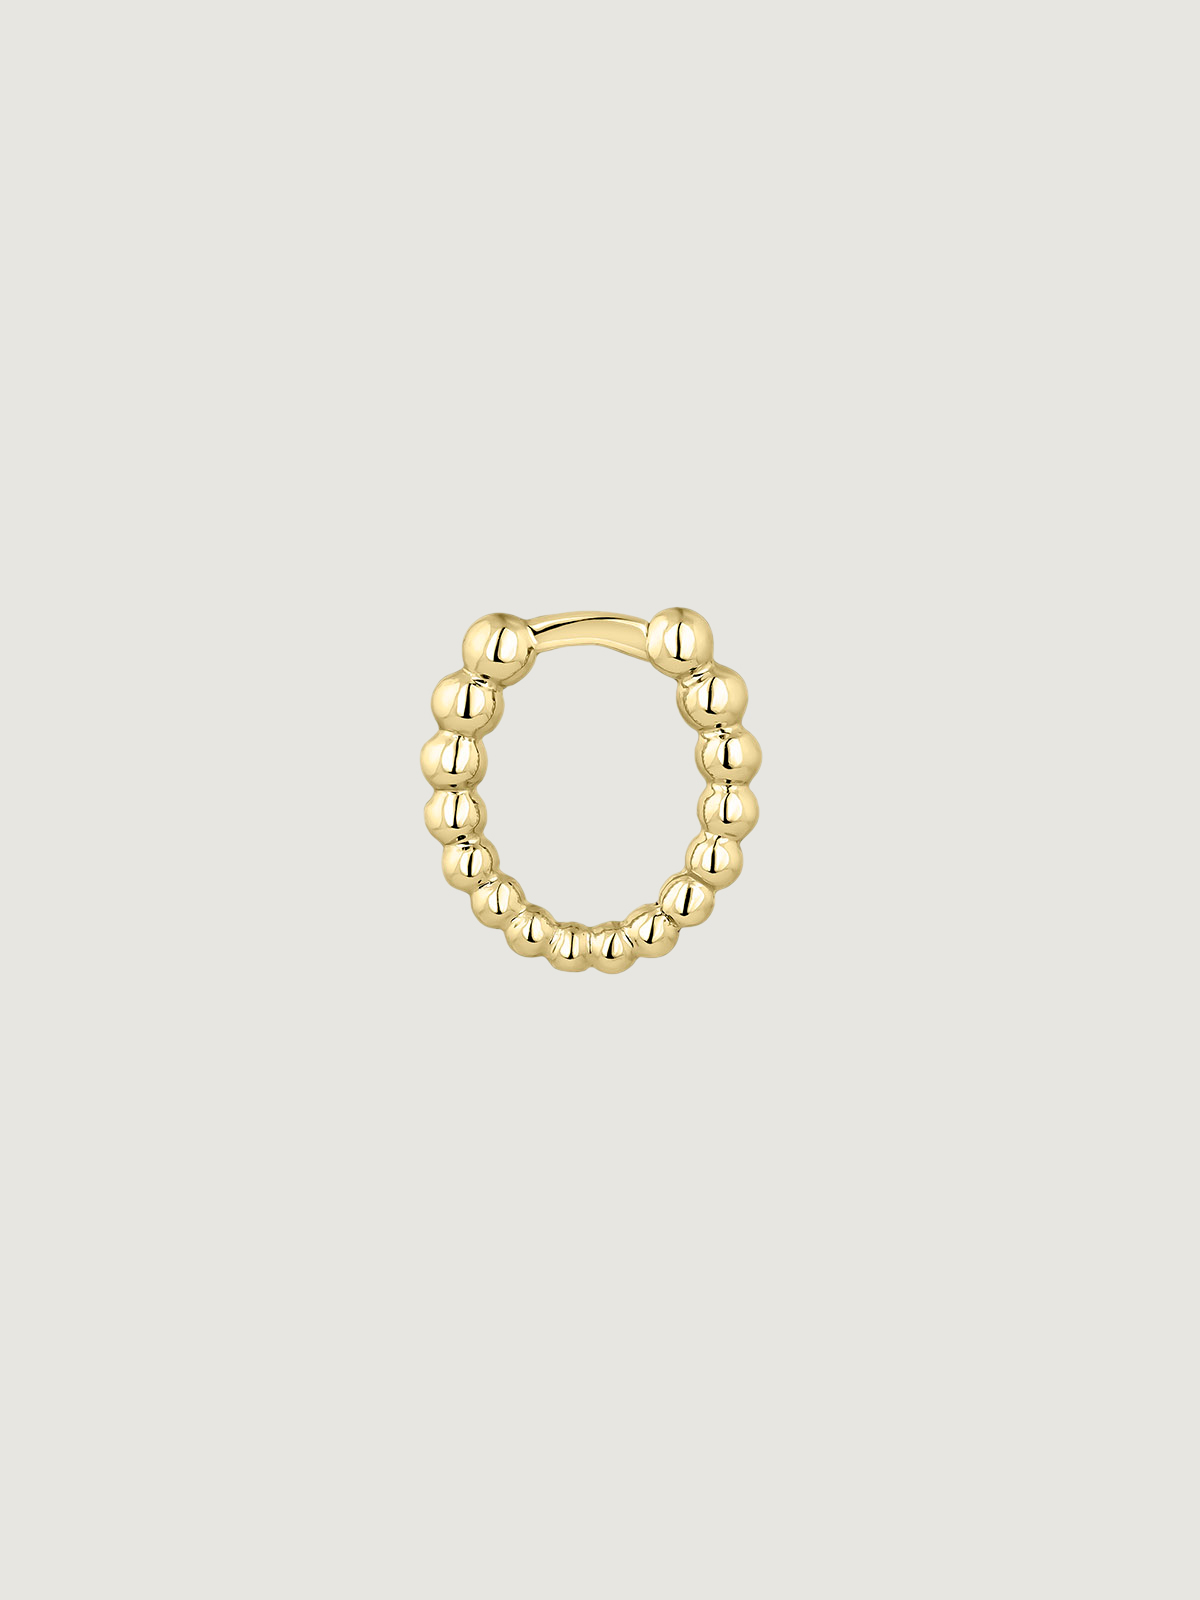 Small individual 9K yellow gold hoop earring with tiny balls.